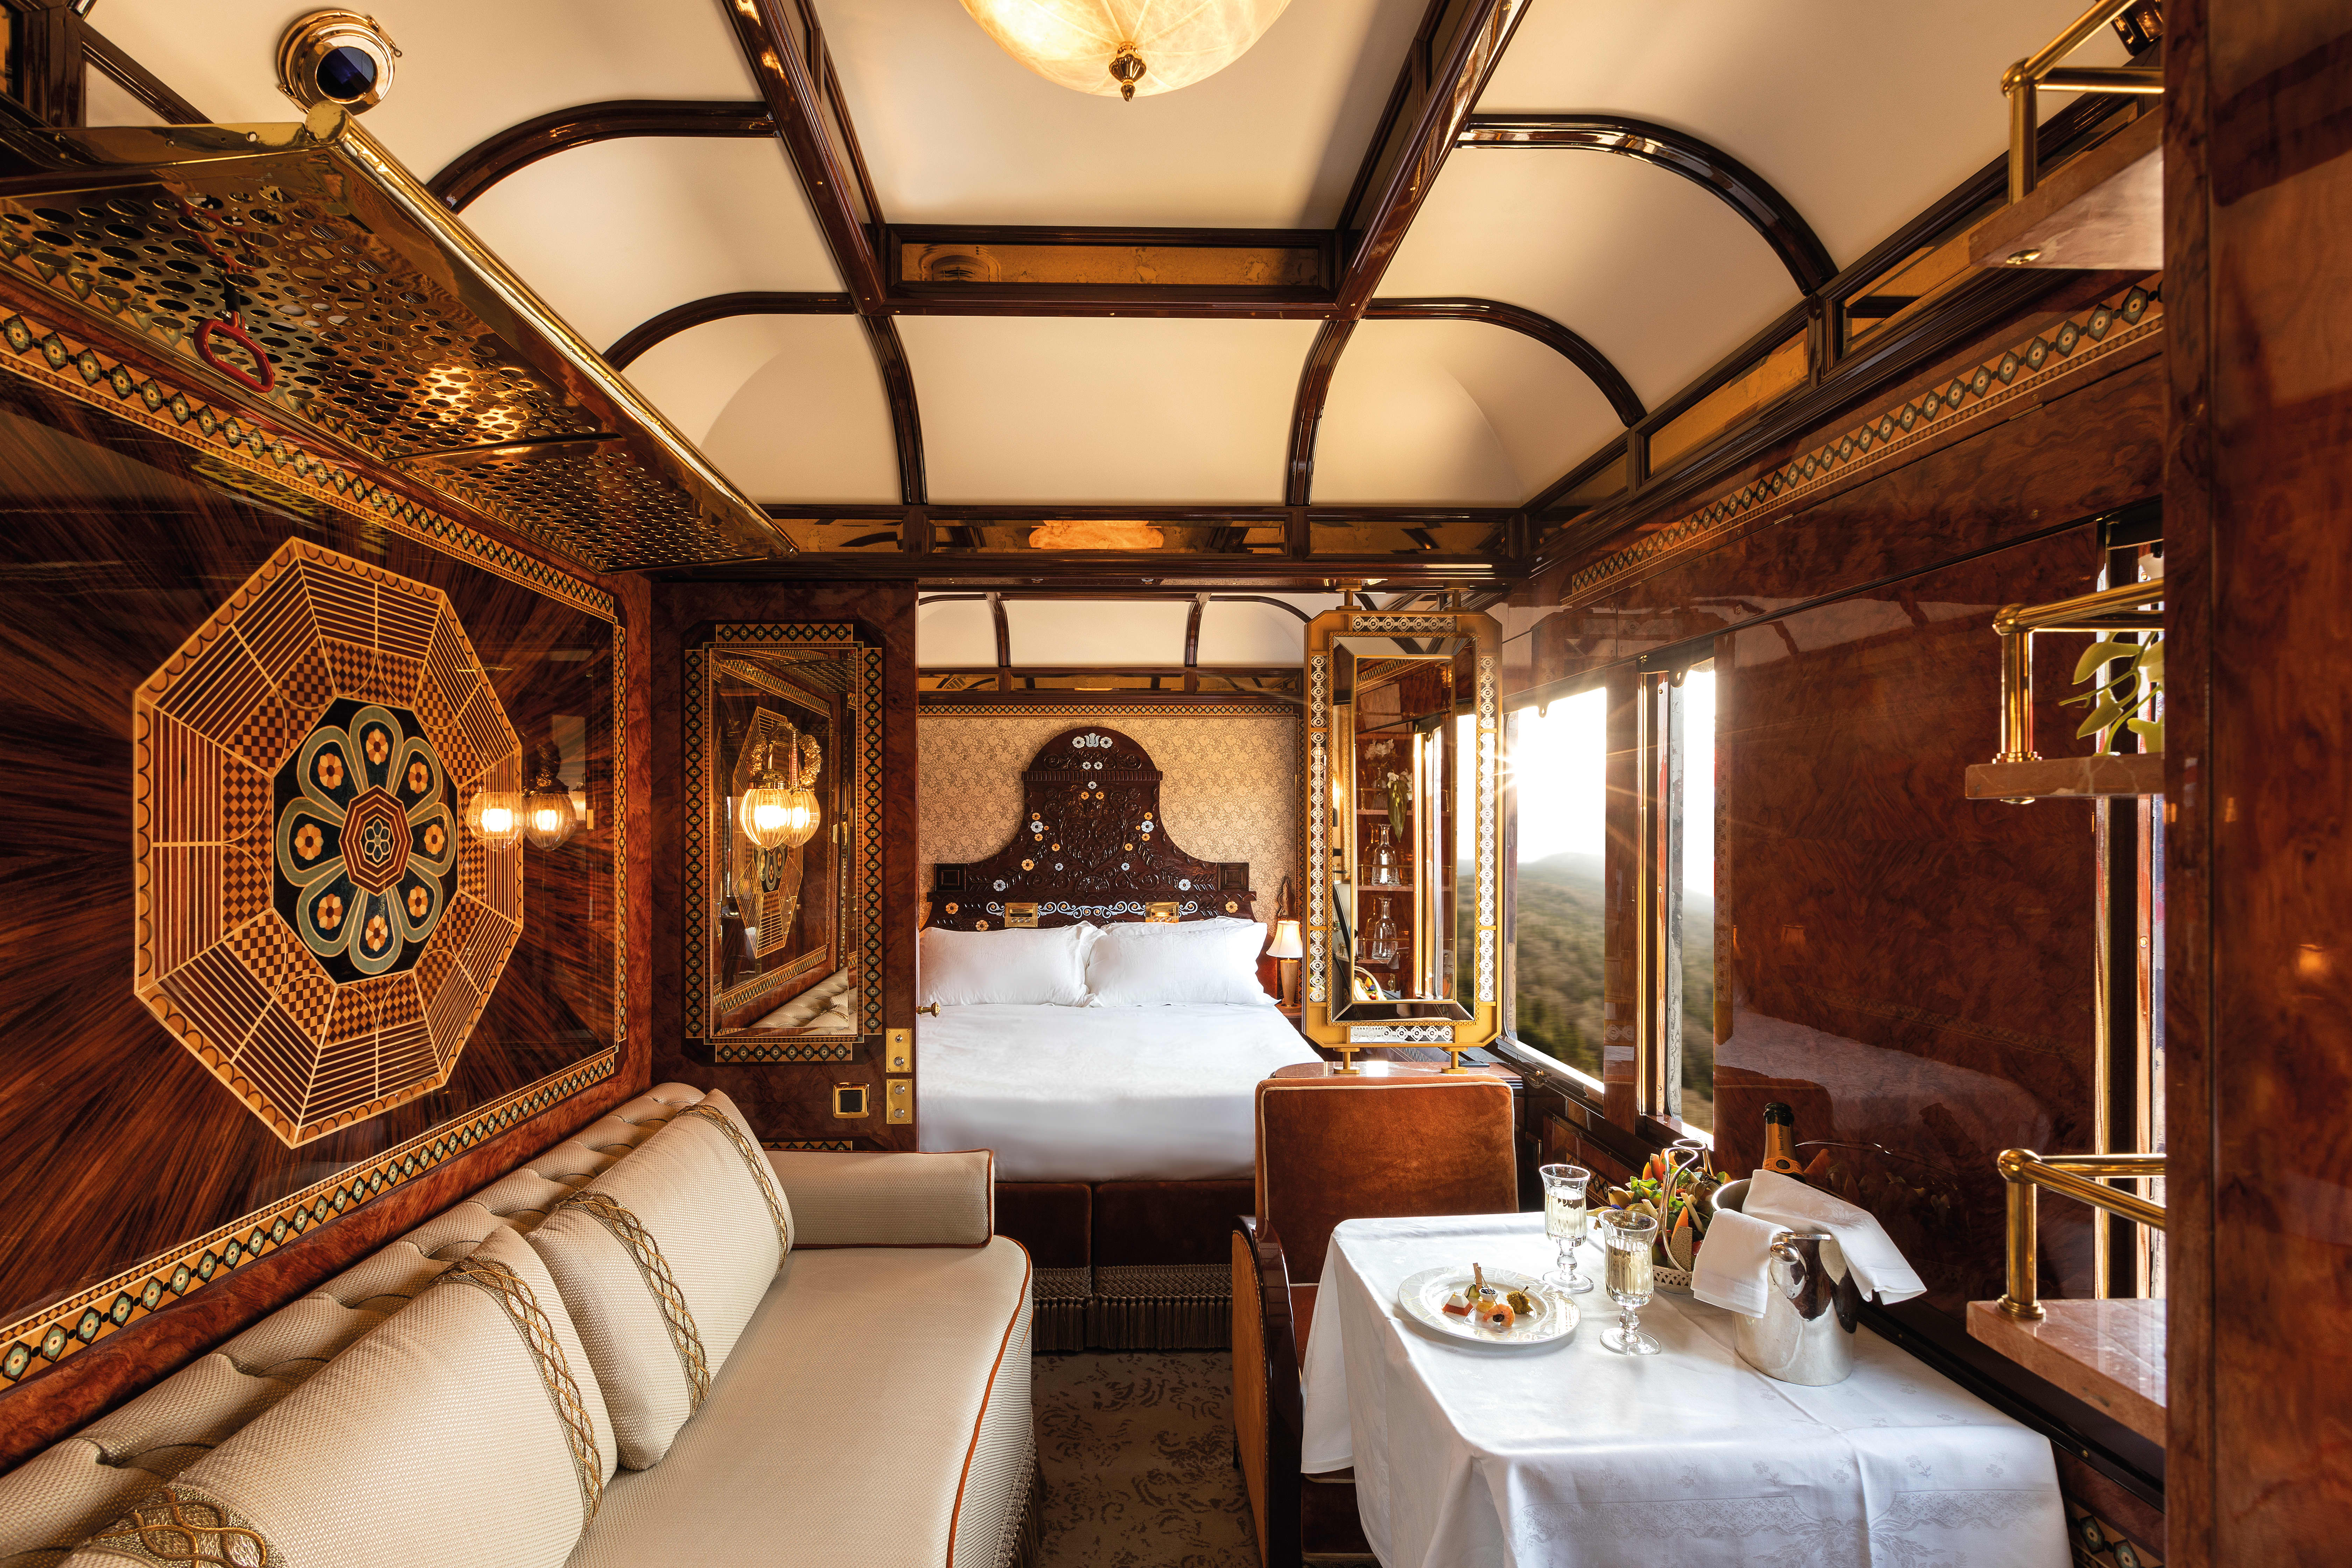 Venice Simplon Orient Express: Know All About It For A Luxury Ride